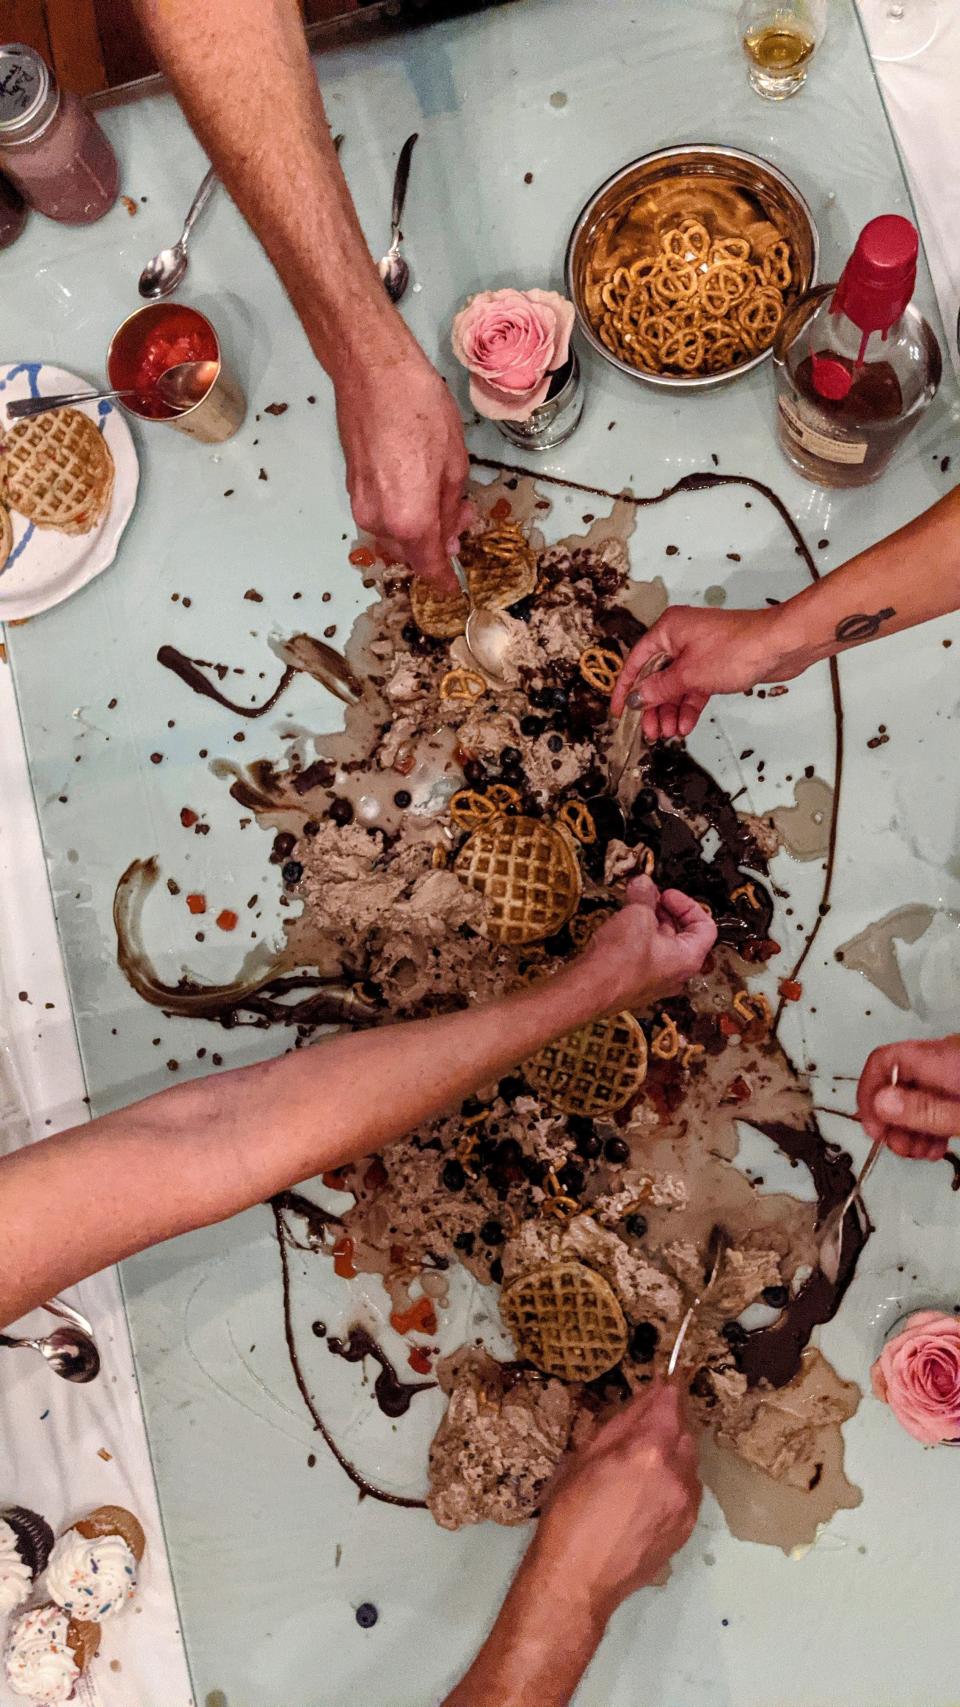 A dinner party can go interactive, like this build-your-own dessert station featuring liquid nitrogen ice cream created on-site by STEM Educator Jerald Smith